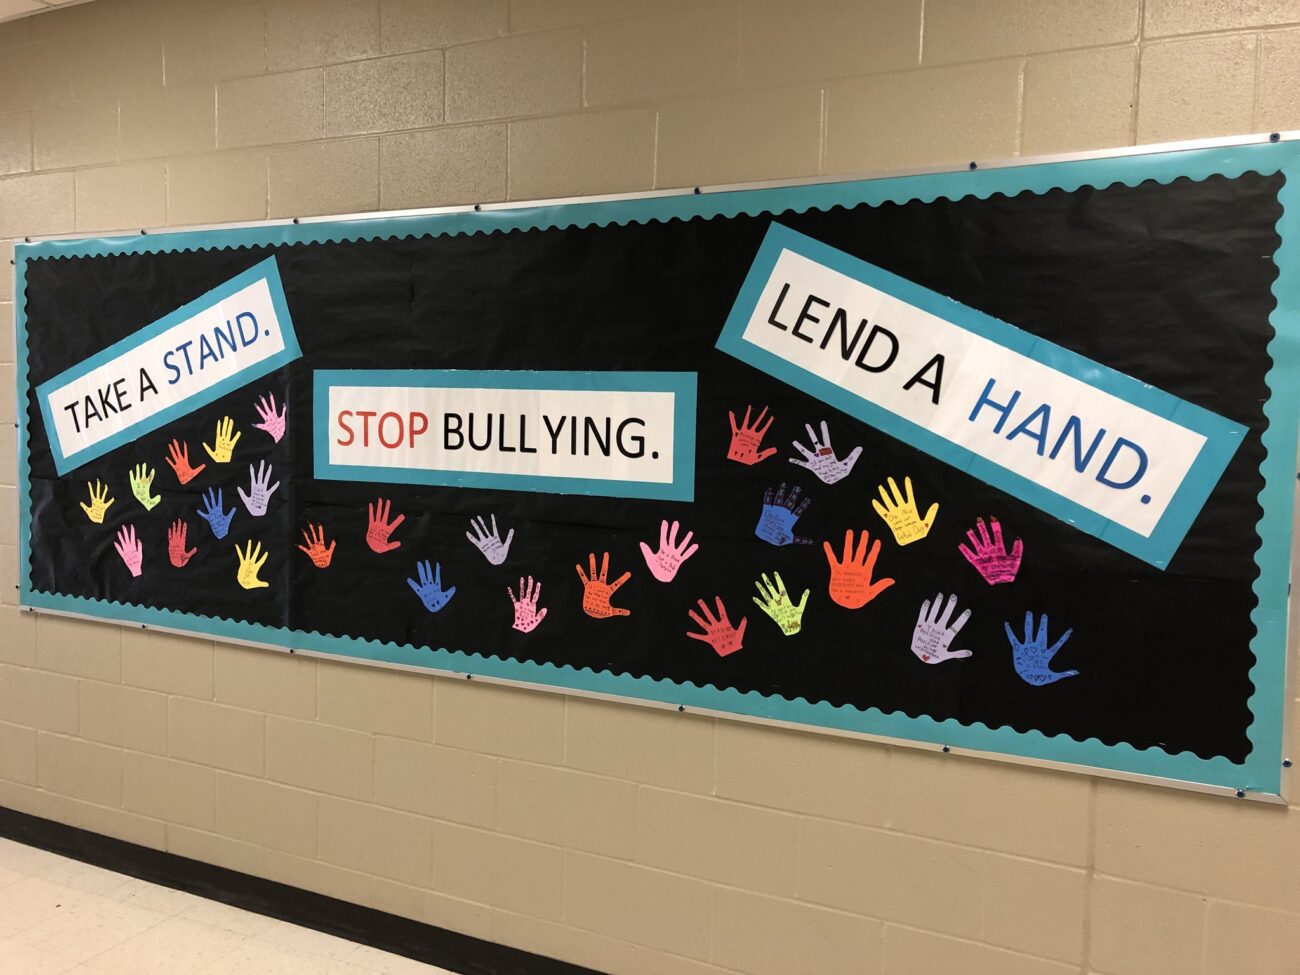 30 October Bulletin Boards To Try in Your Classroom